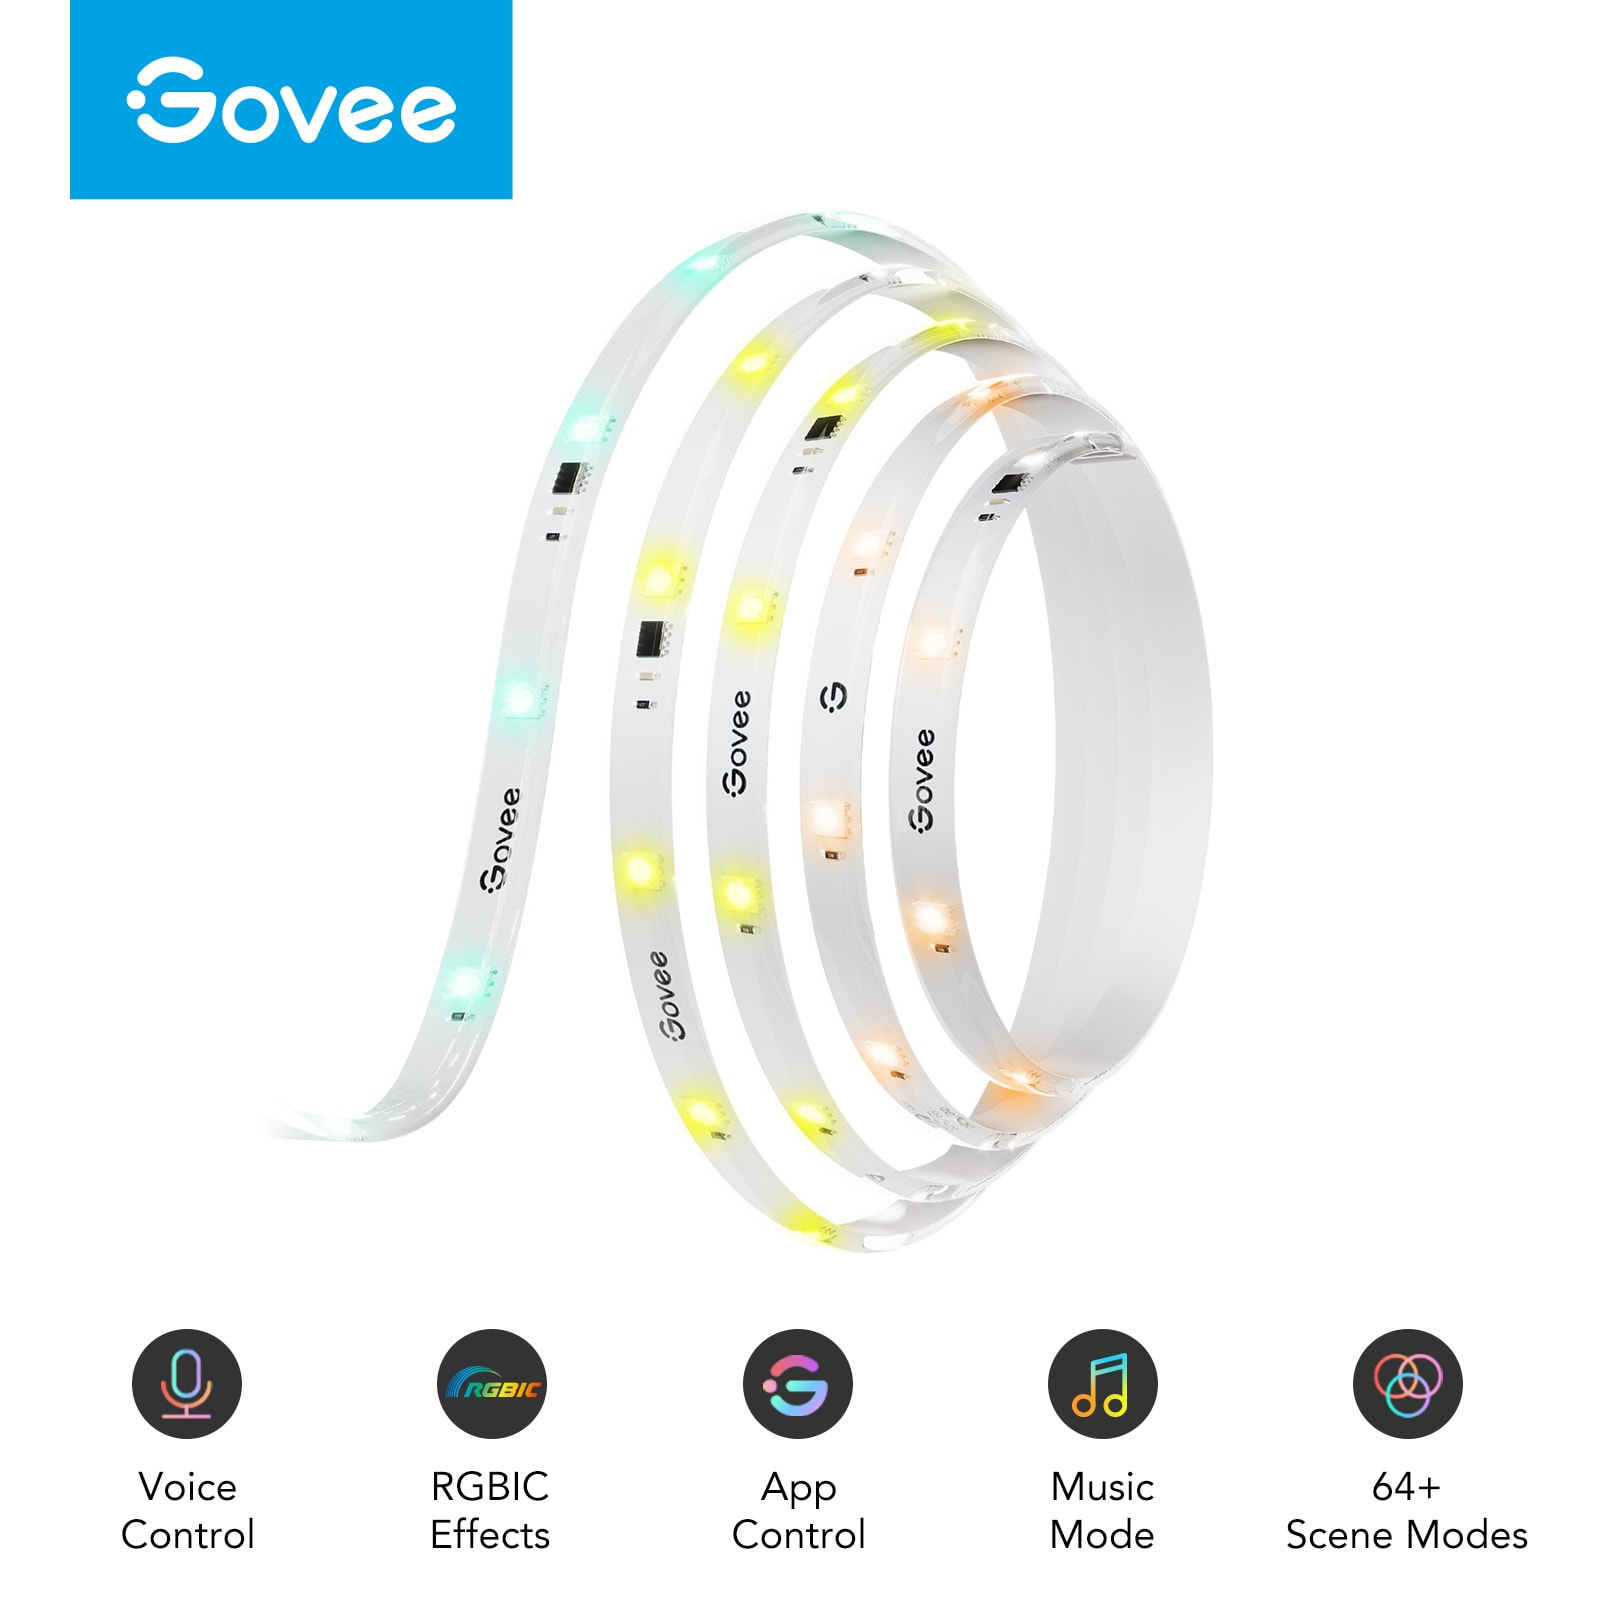 Govee RGB Colour Changing LED Strip Lights 20m x 2 with Remote & Control  Box - 2 Rolls of 10m £17.99 Sold by Govee : r/Govee